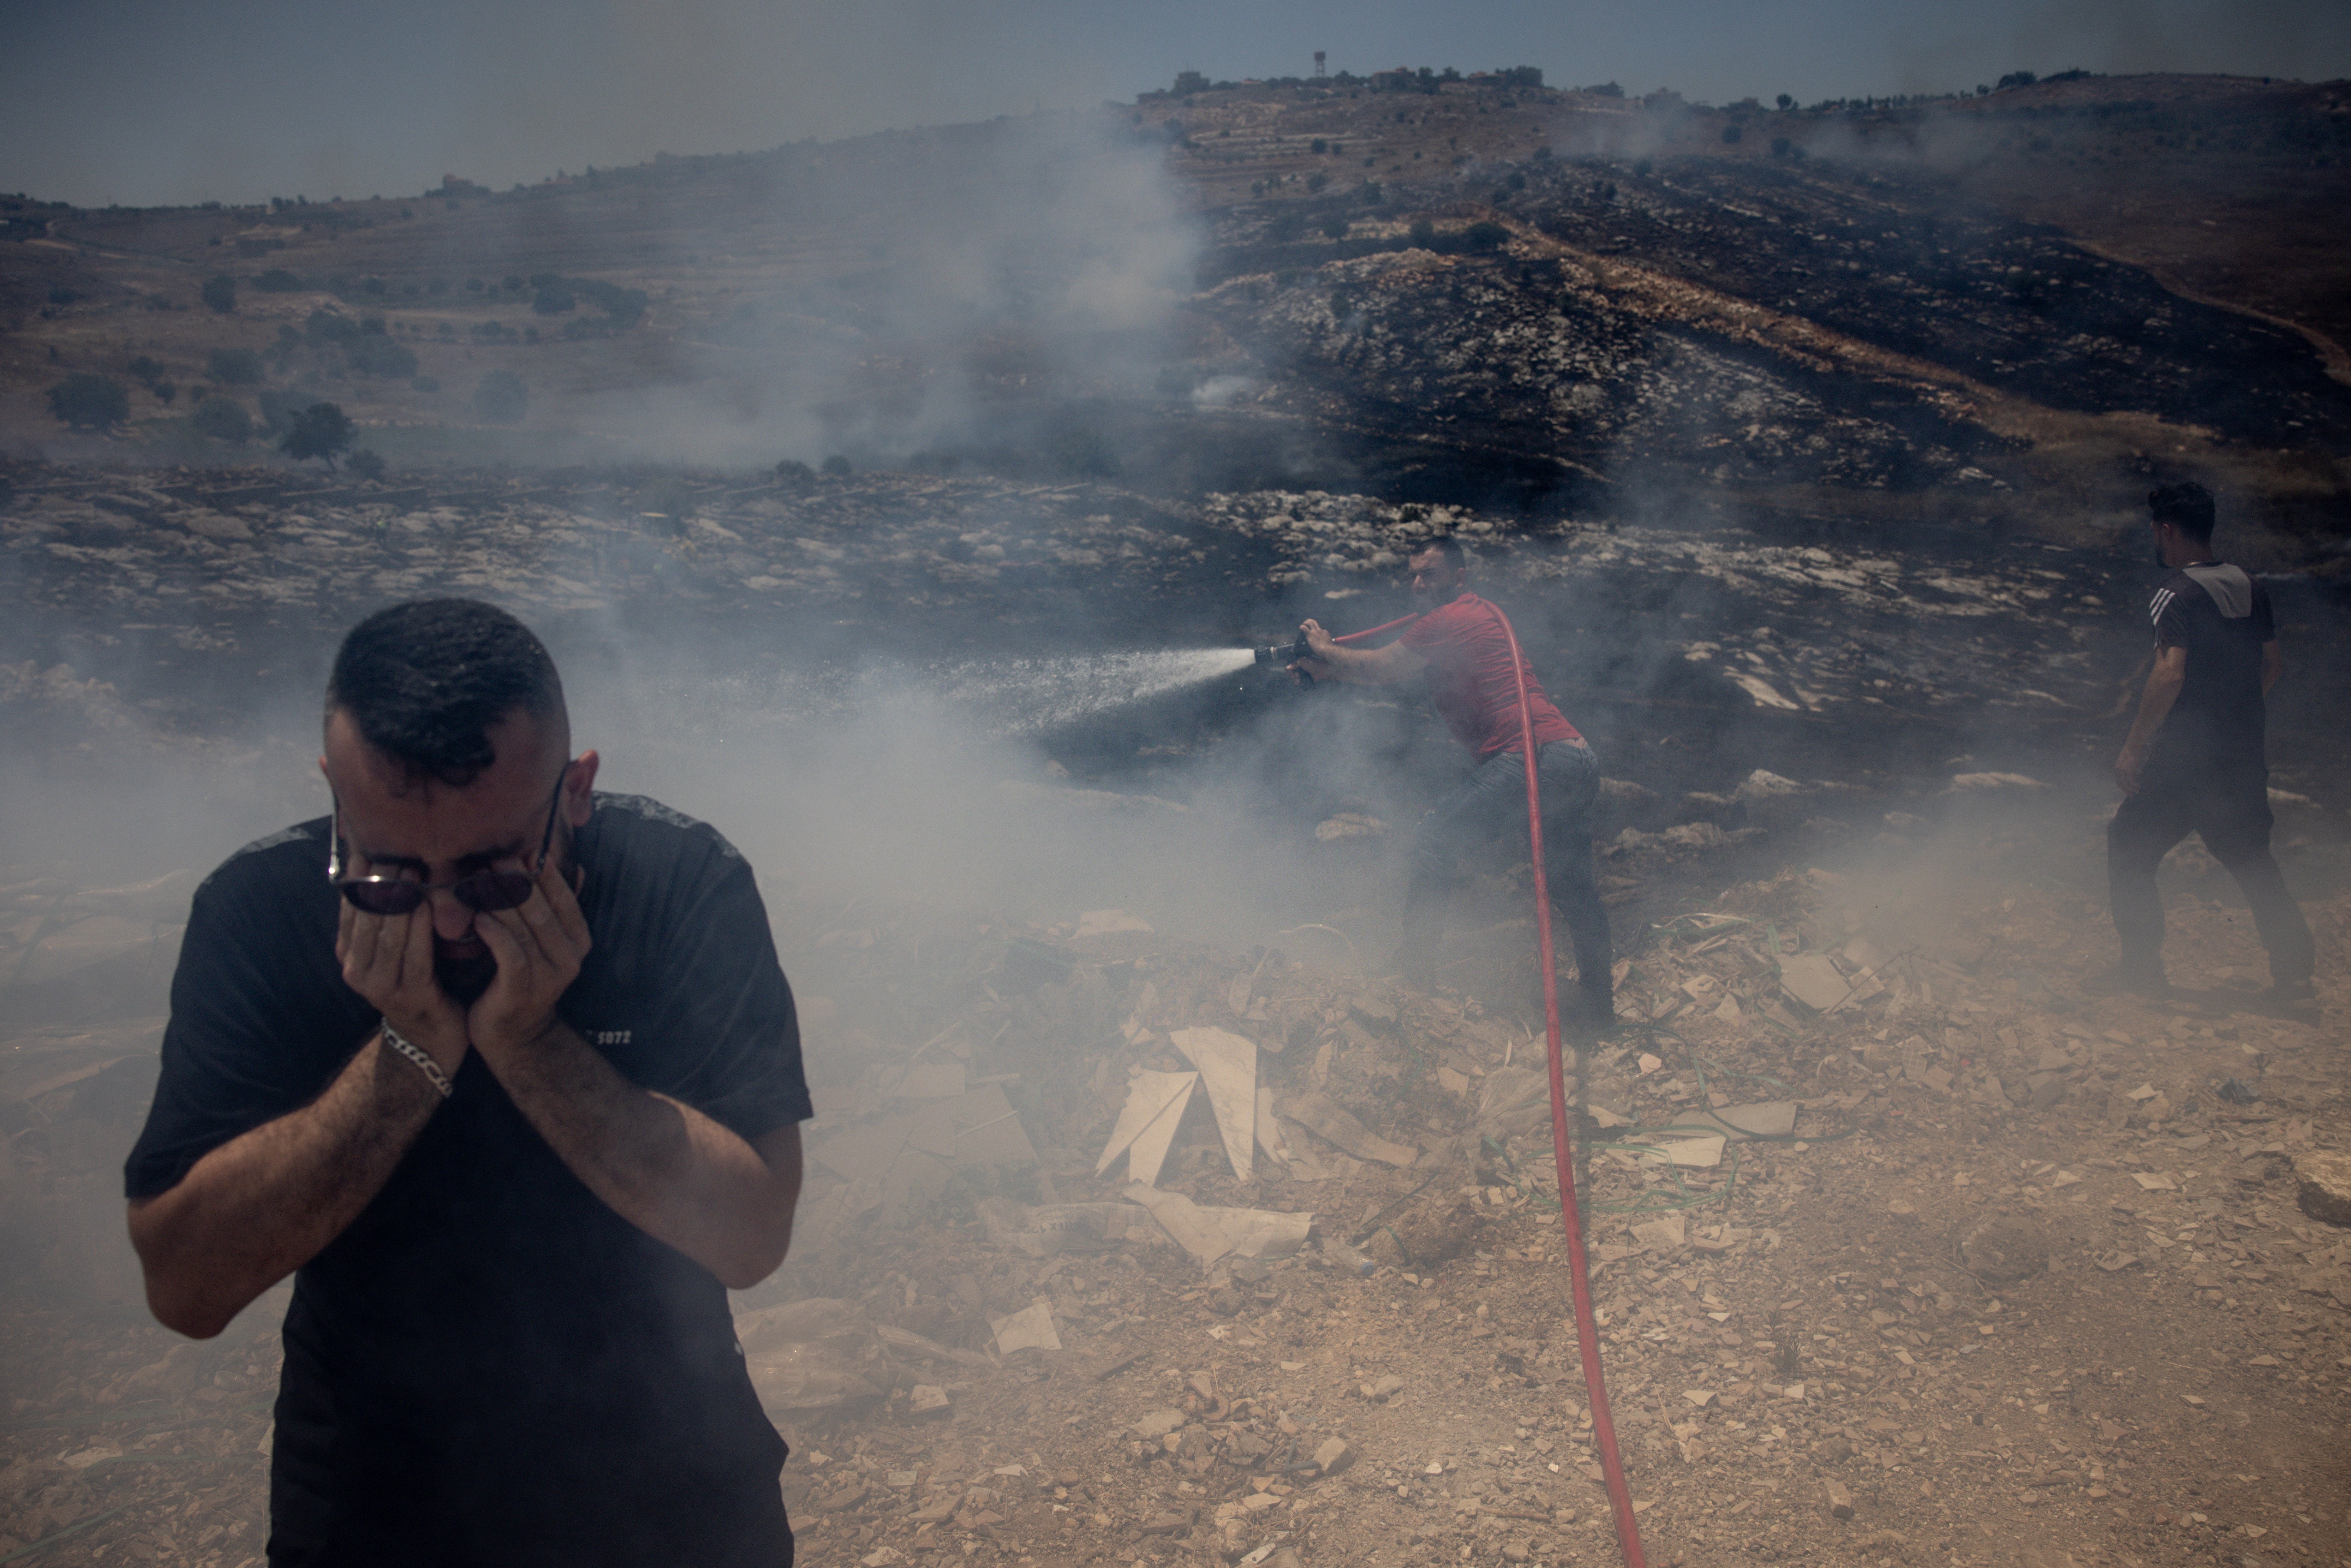 A man protects his eyes from smoke as civilians try to put out fires caused by multiple Israeli strikes that hit targets next to the main road in Bint Jbeil, Lebanon